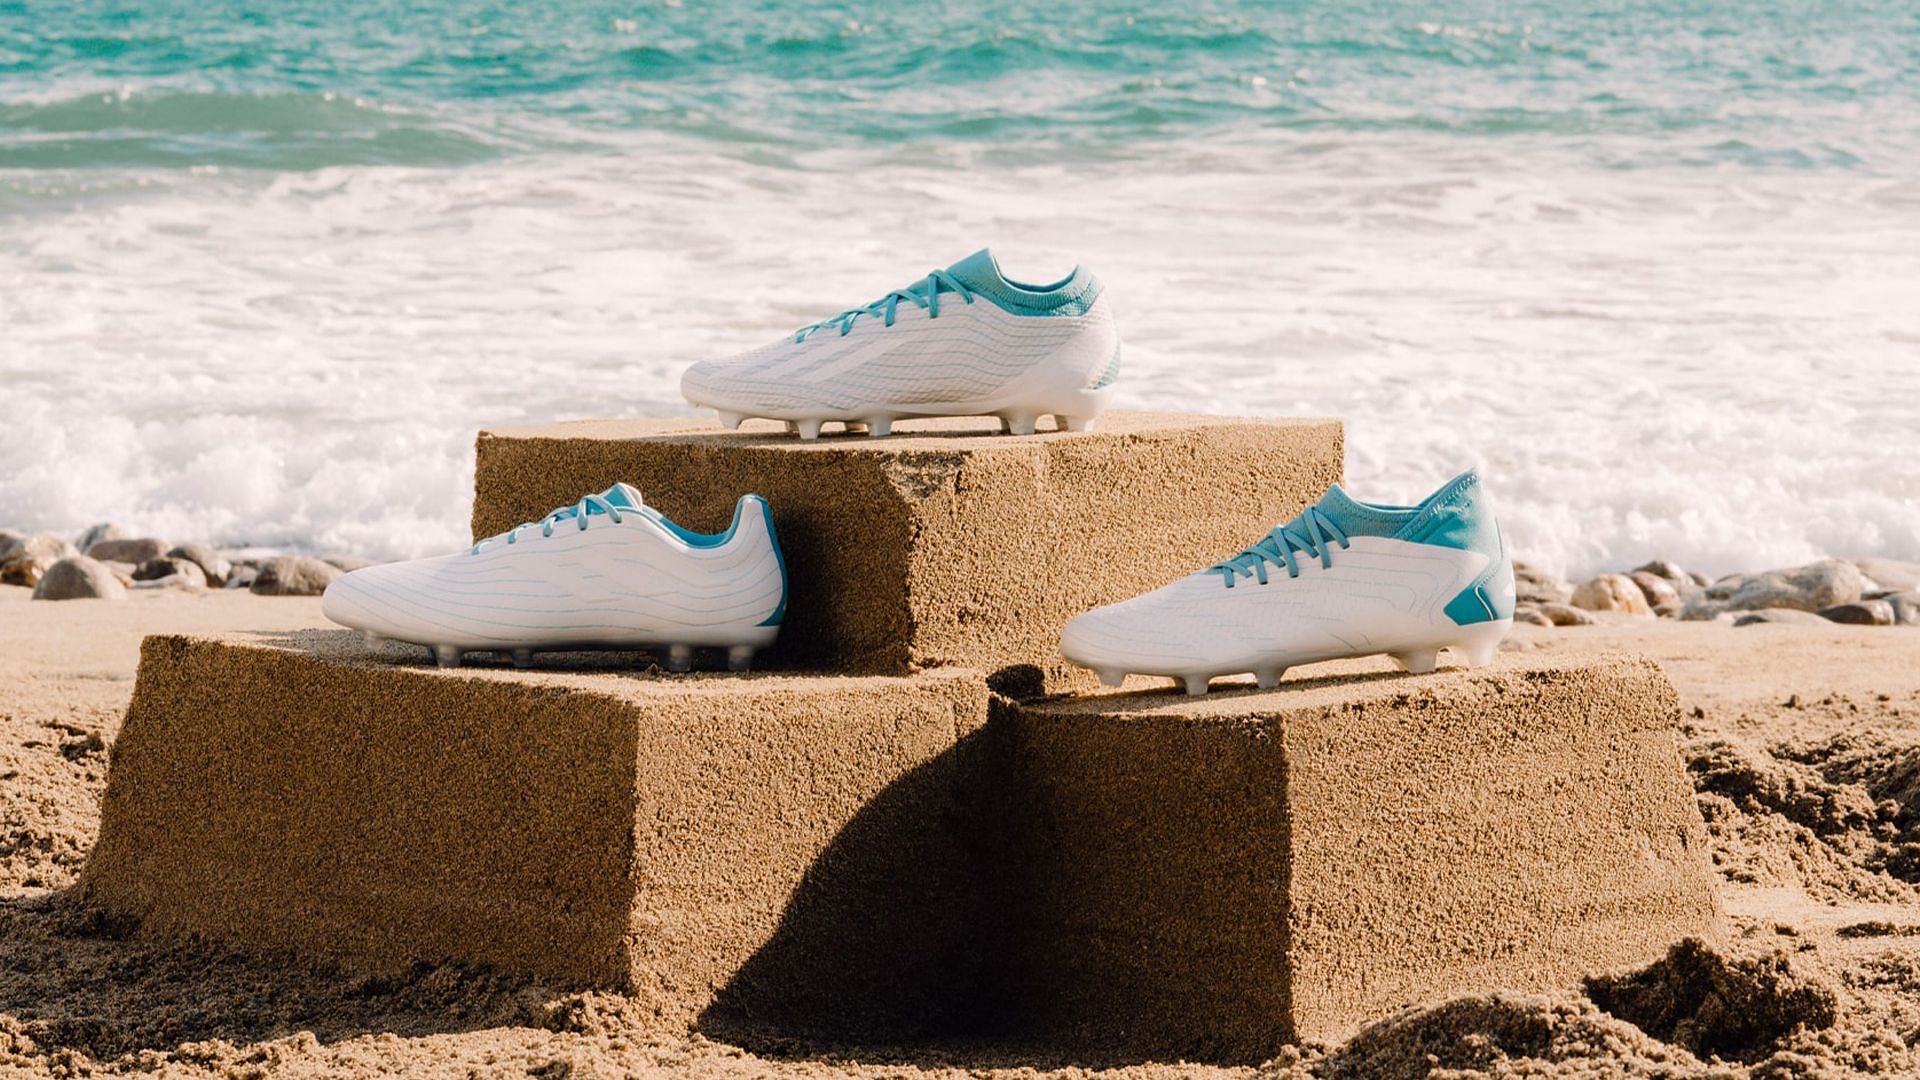 The newly launched Adidas x Parley for the Oceans collaboration features the first football pack made to reduce plastic waste. (Image via Adidas)